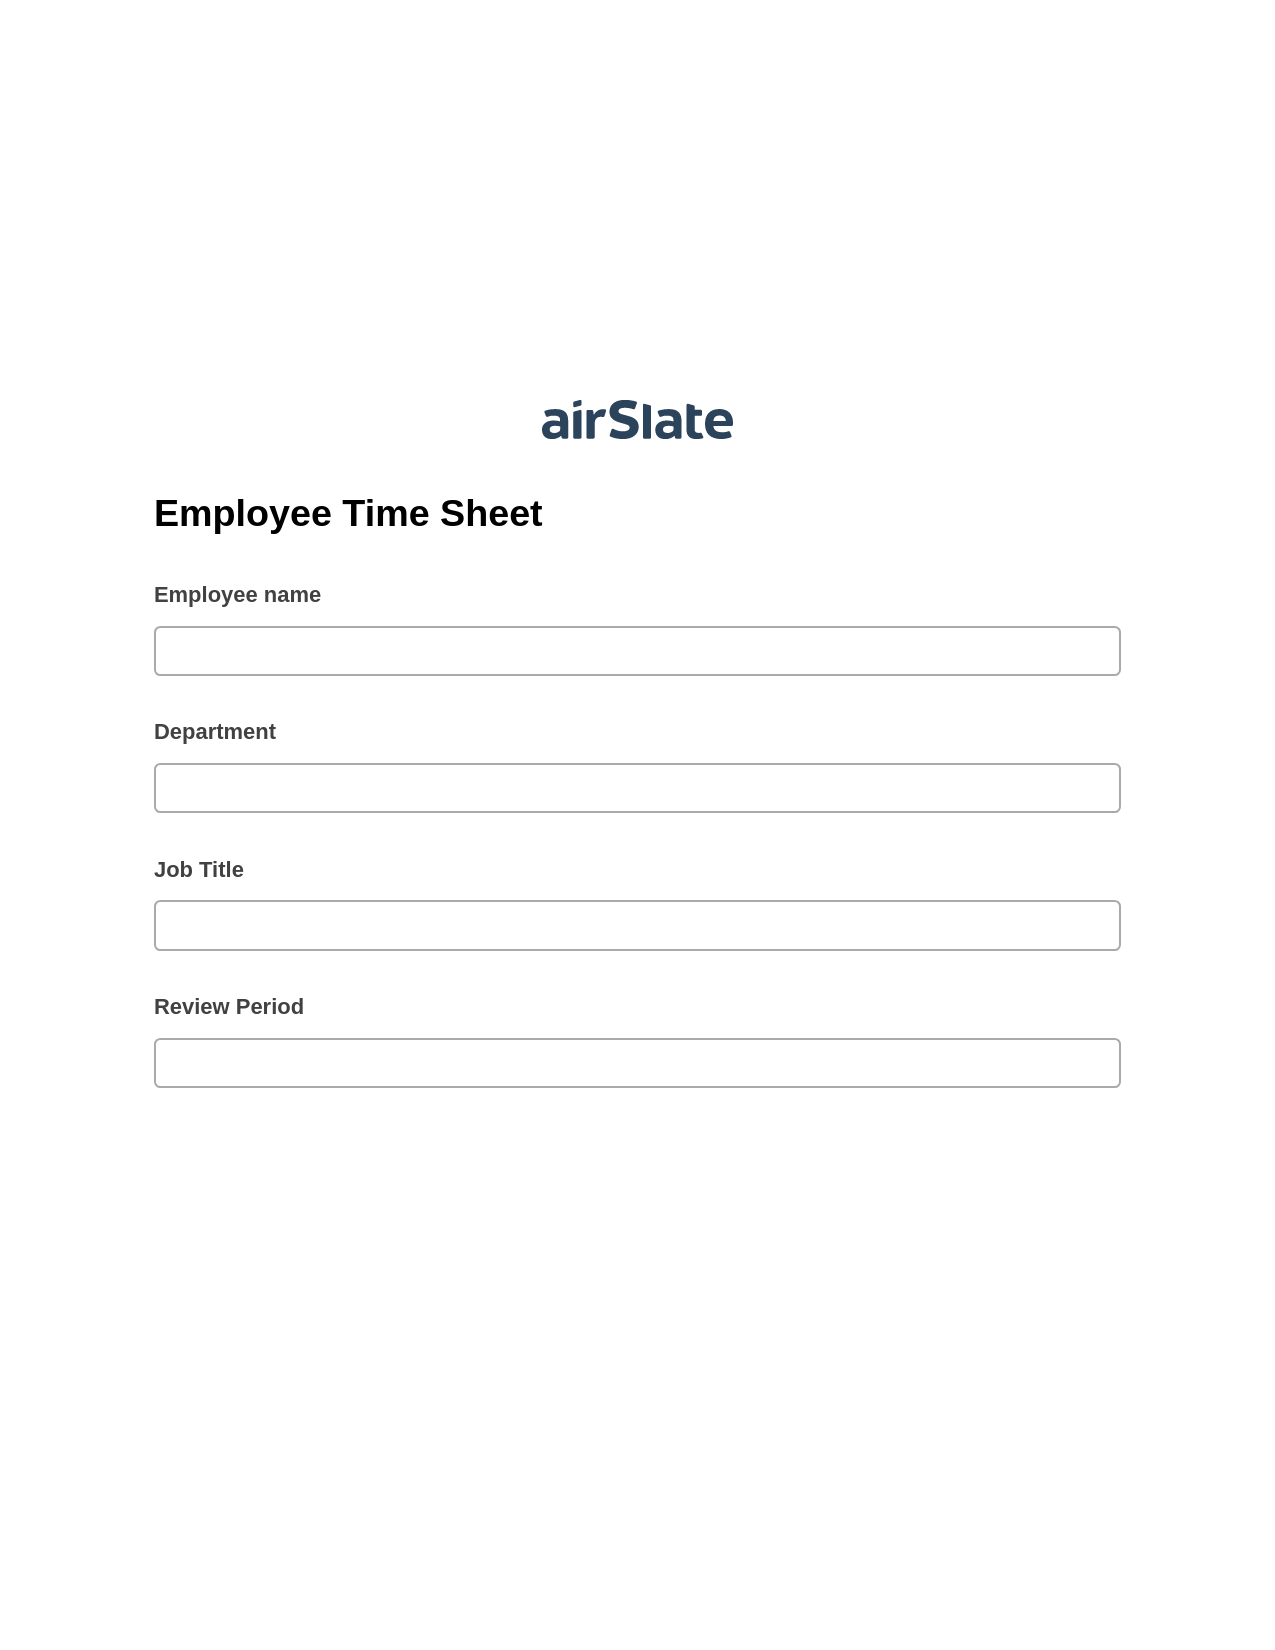 Employee Time Sheet Pre-fill Dropdowns from Airtable, Update Audit Trail Bot, Export to Excel 365 Bot